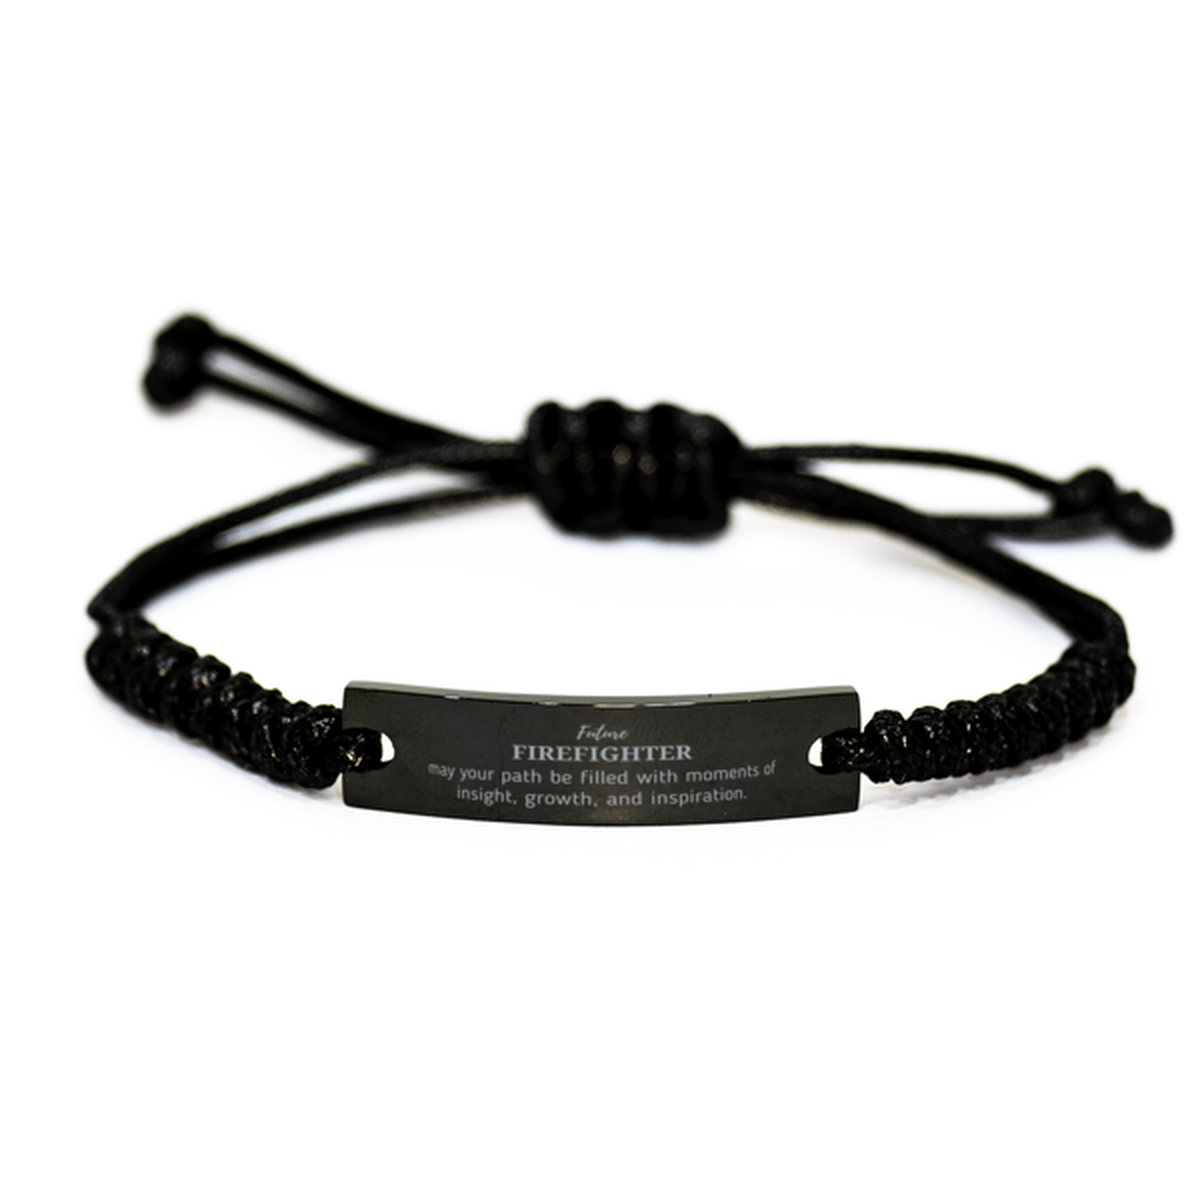 Future Firefighter Gifts, May your path be filled with moments of insight, Graduation Gifts for New Firefighter, Christmas Unique Black Rope Bracelet For Men, Women, Friends